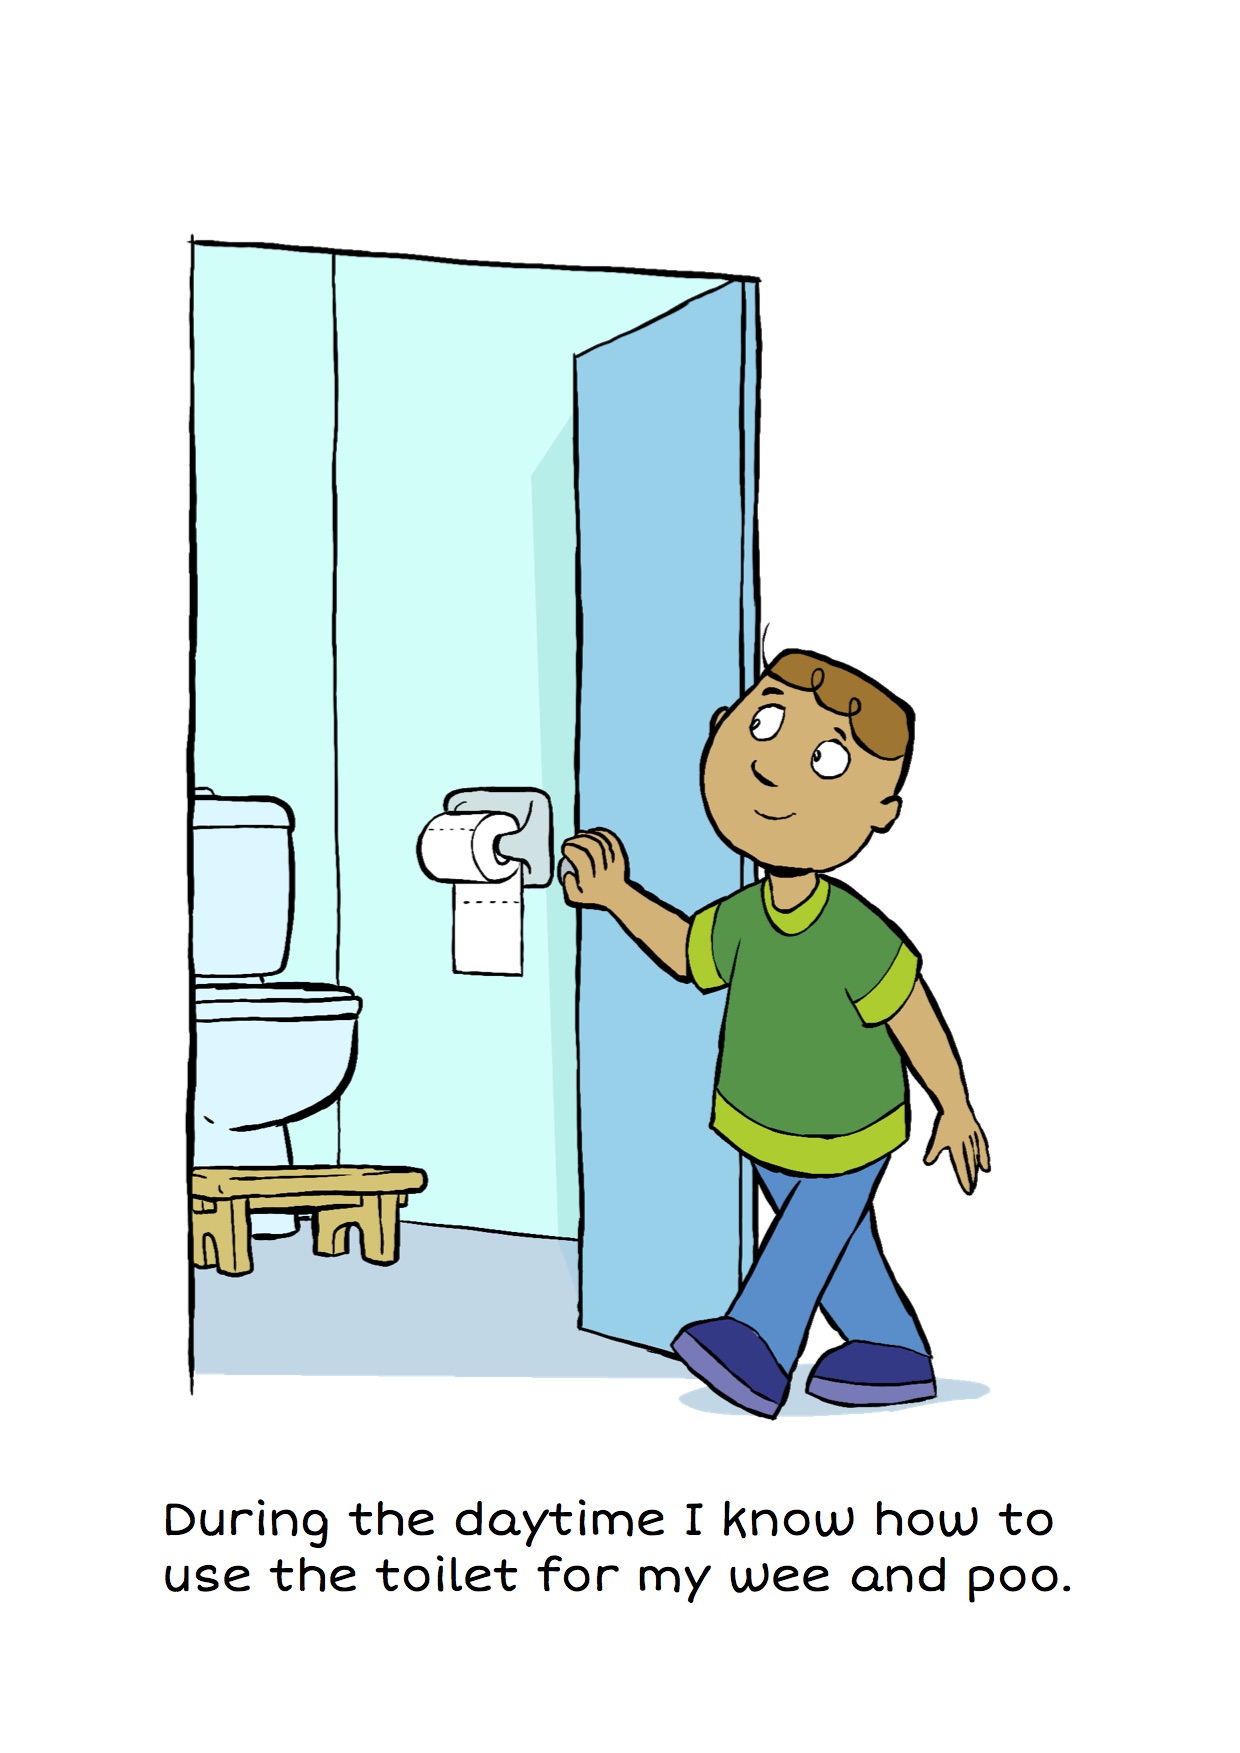 Toilet Time: A story for boys learning to use the toilet during the night